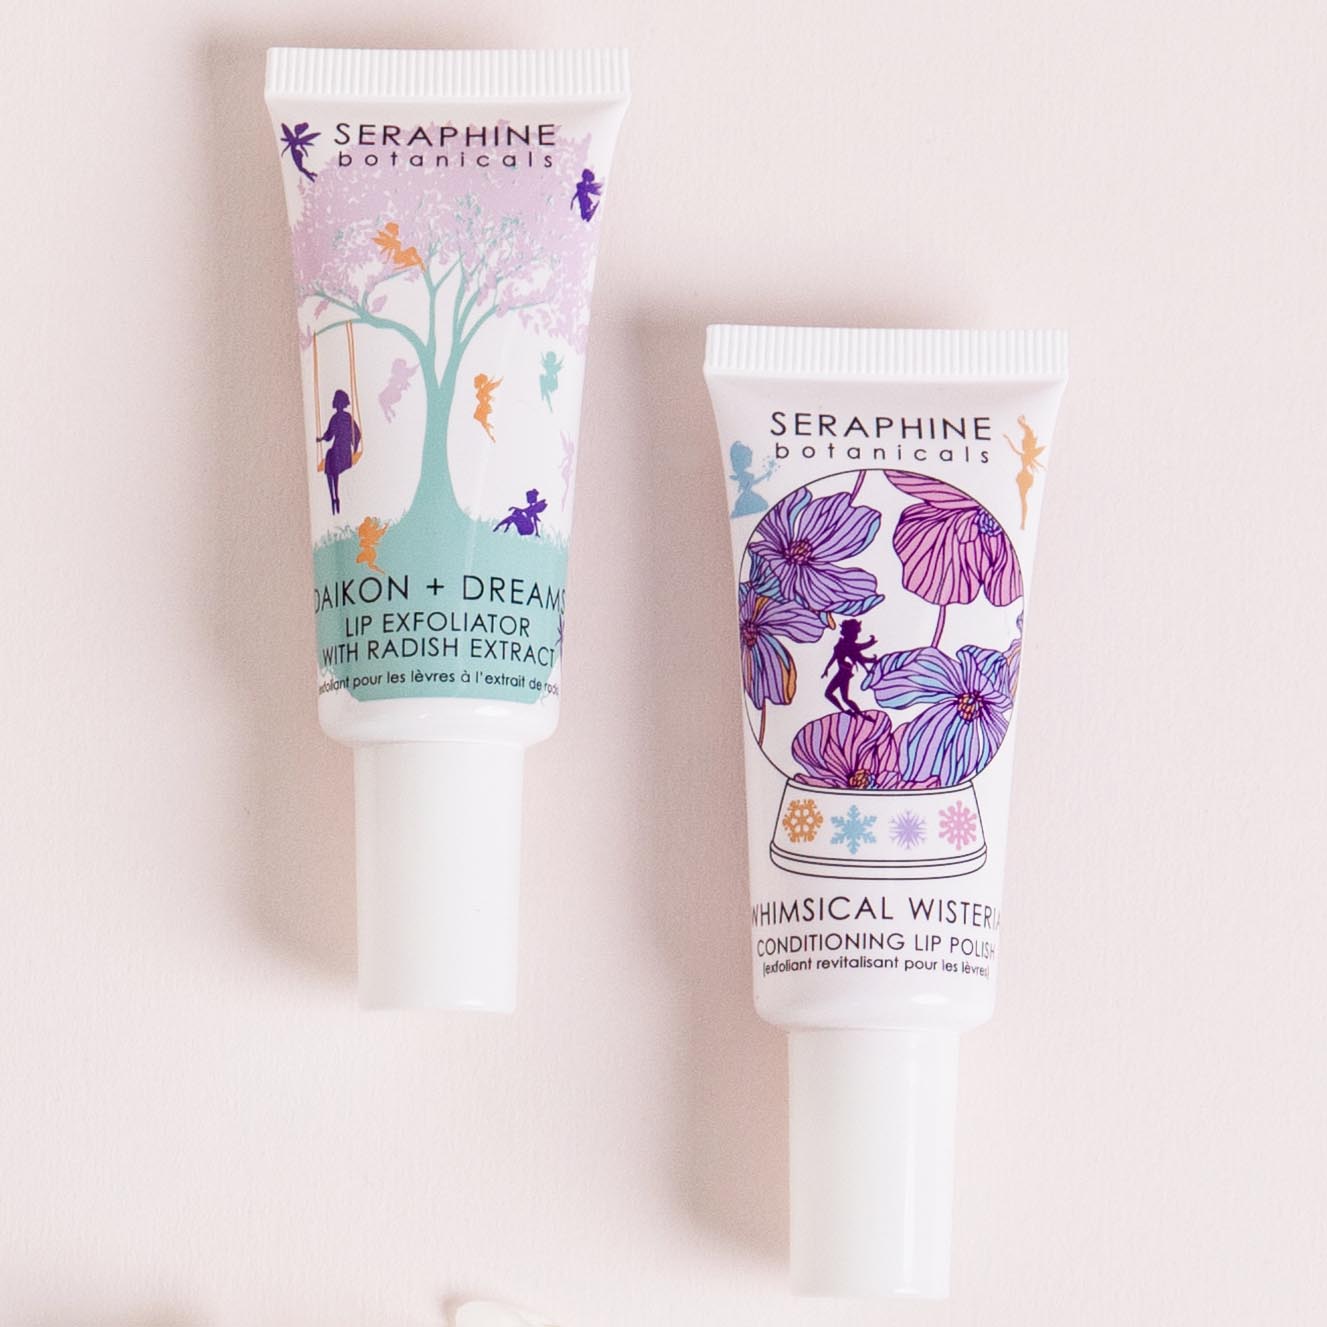 Whimsical Wisteria - Conditioning Lip Polish